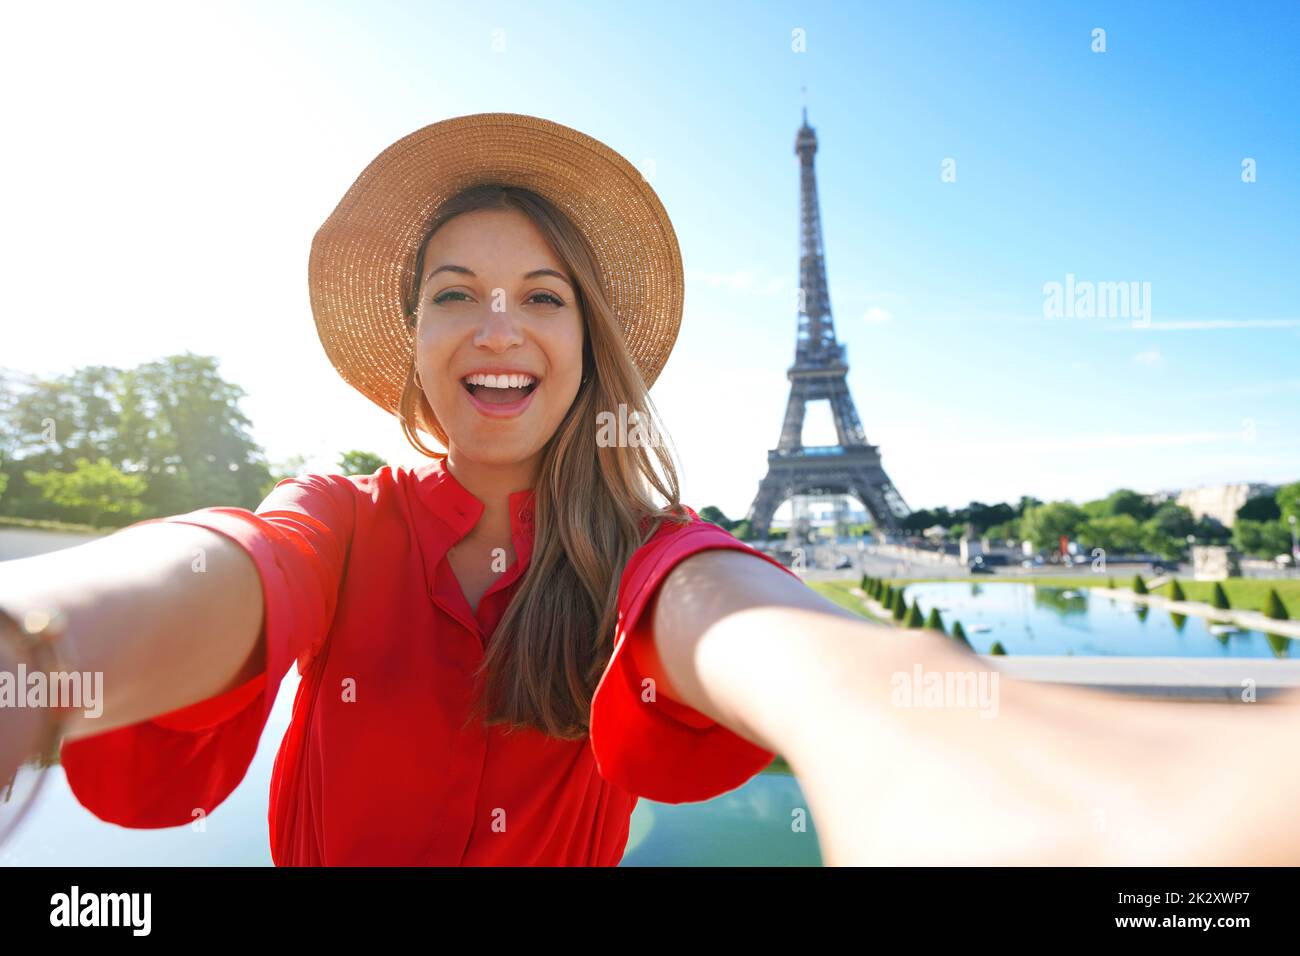 Excited fashion woman with red dress and hat has fun making self portrait with Eiffel Tower on the background in Paris, France. Stock Photo